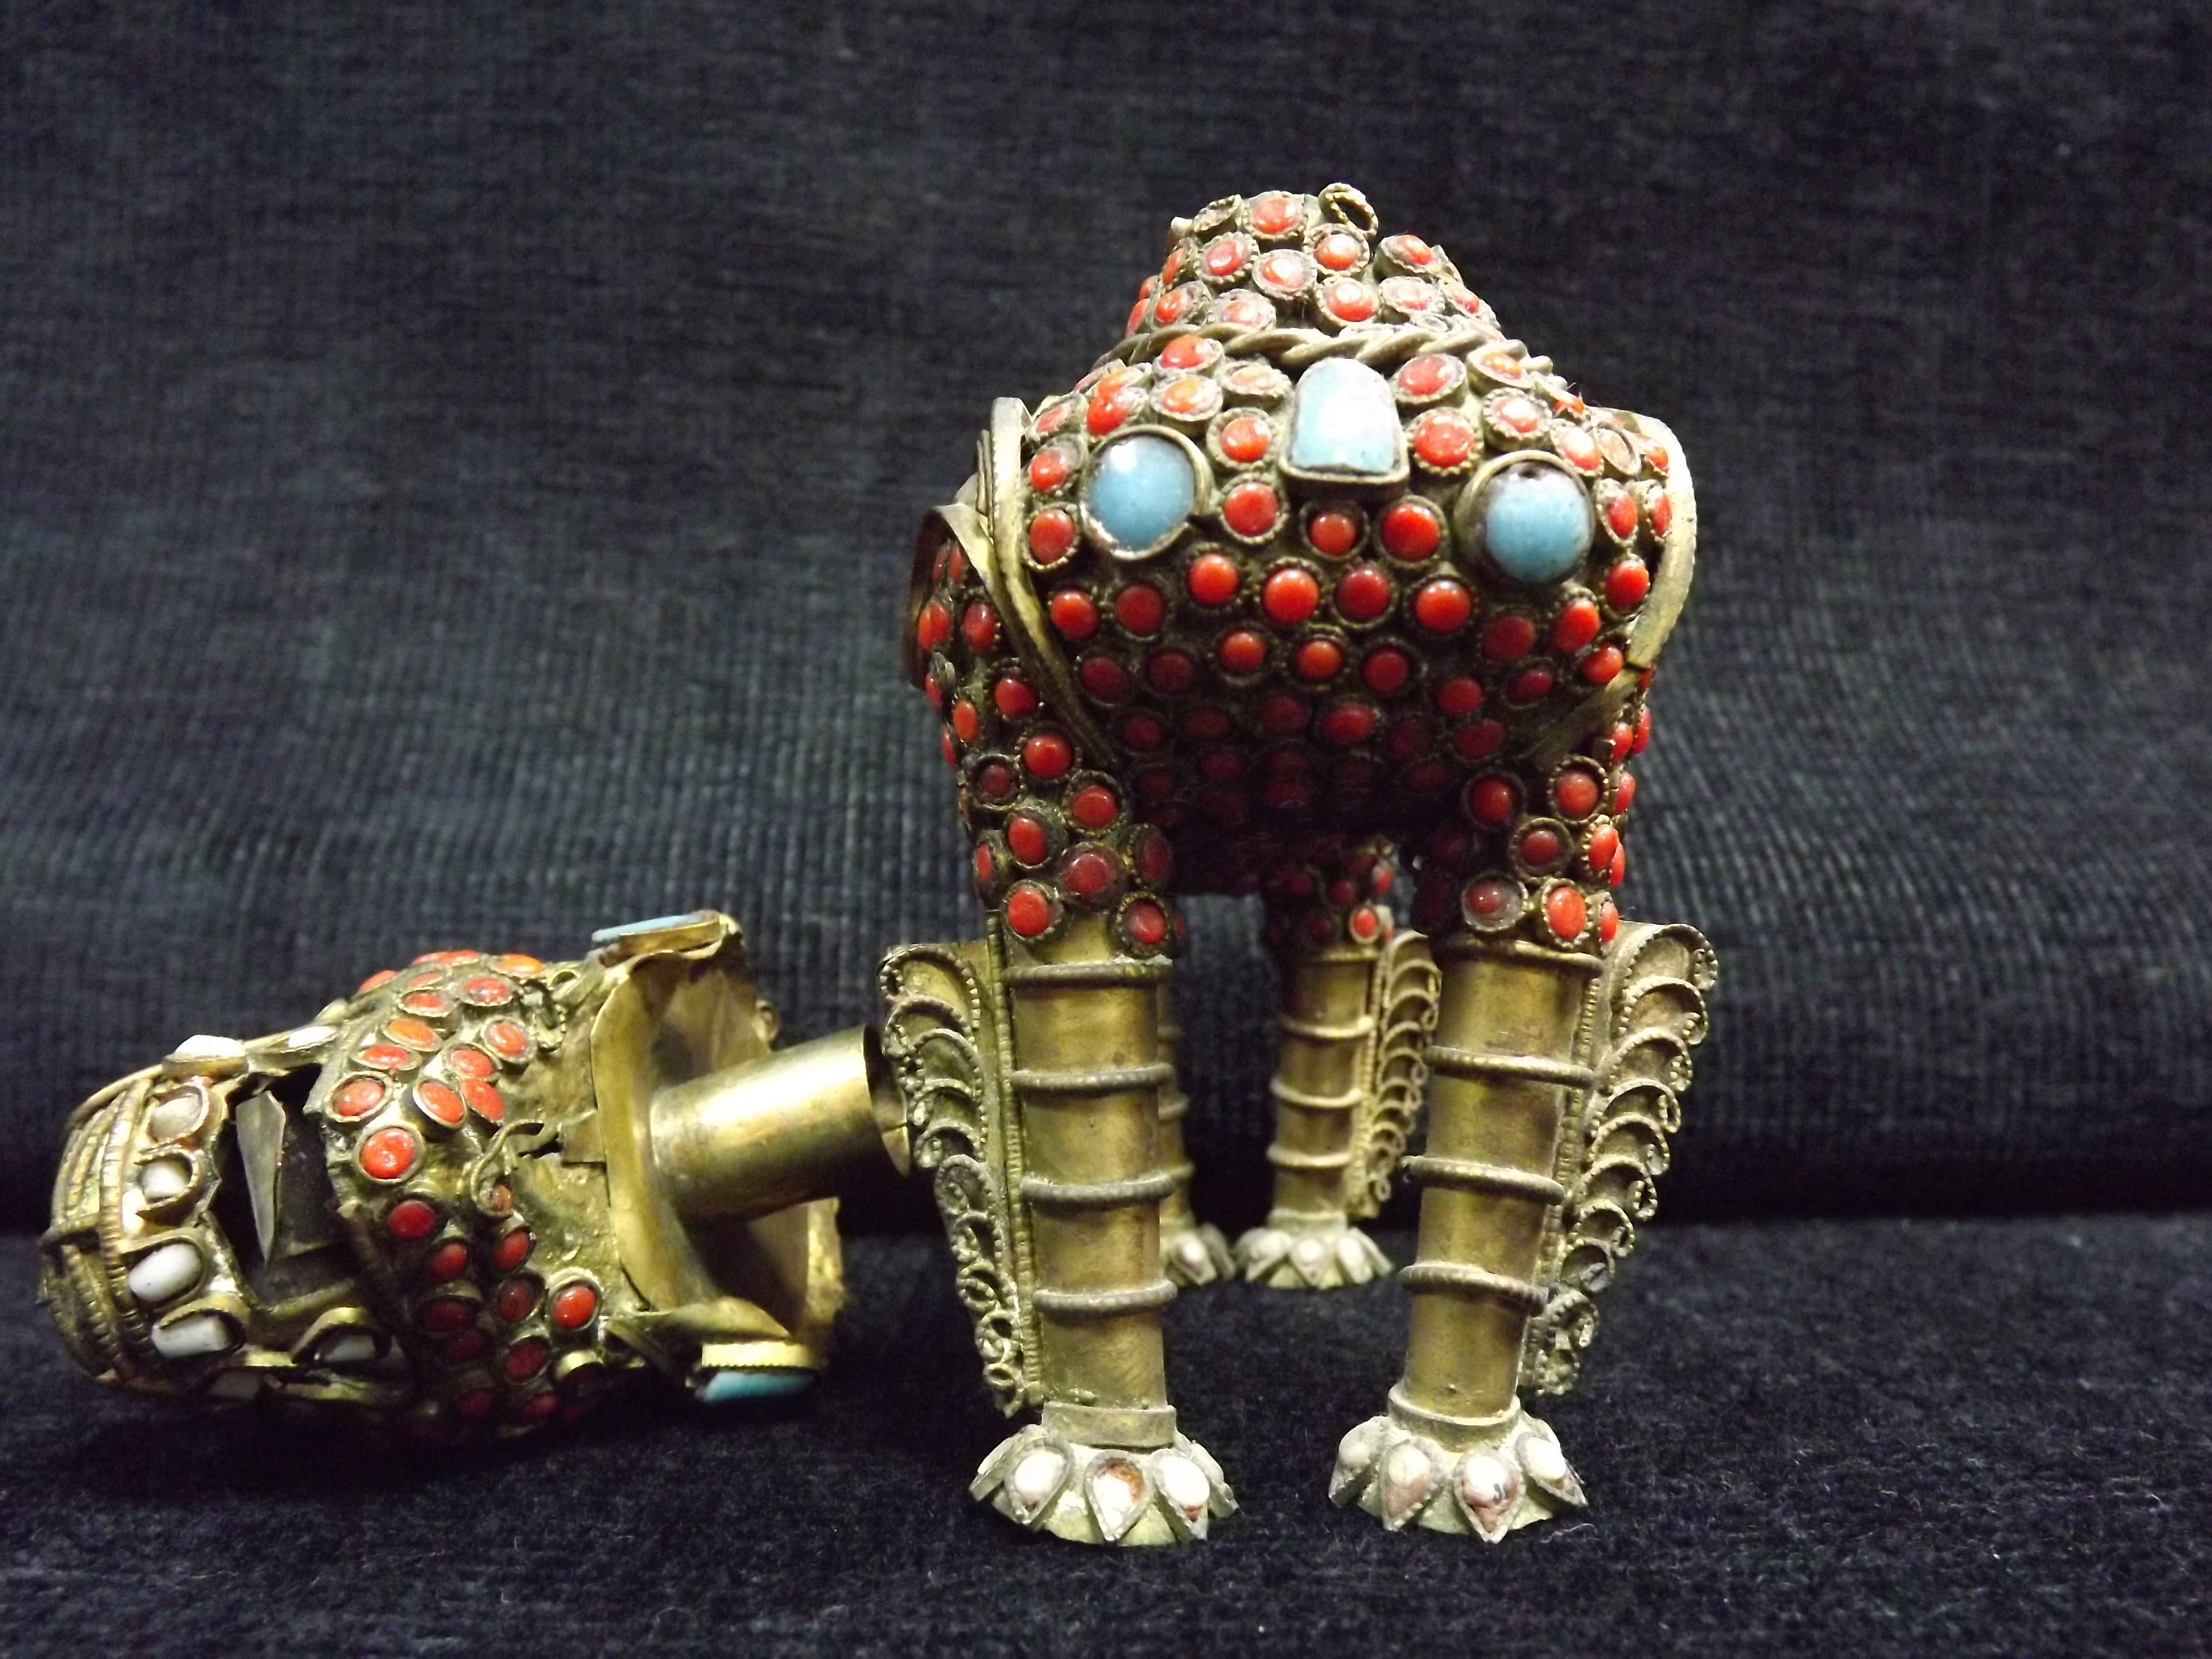 Chinese Gilt Metal and Cloisonne Enamel Qilin Figure. Fine detail, stone or glass eyes. White - Image 4 of 7